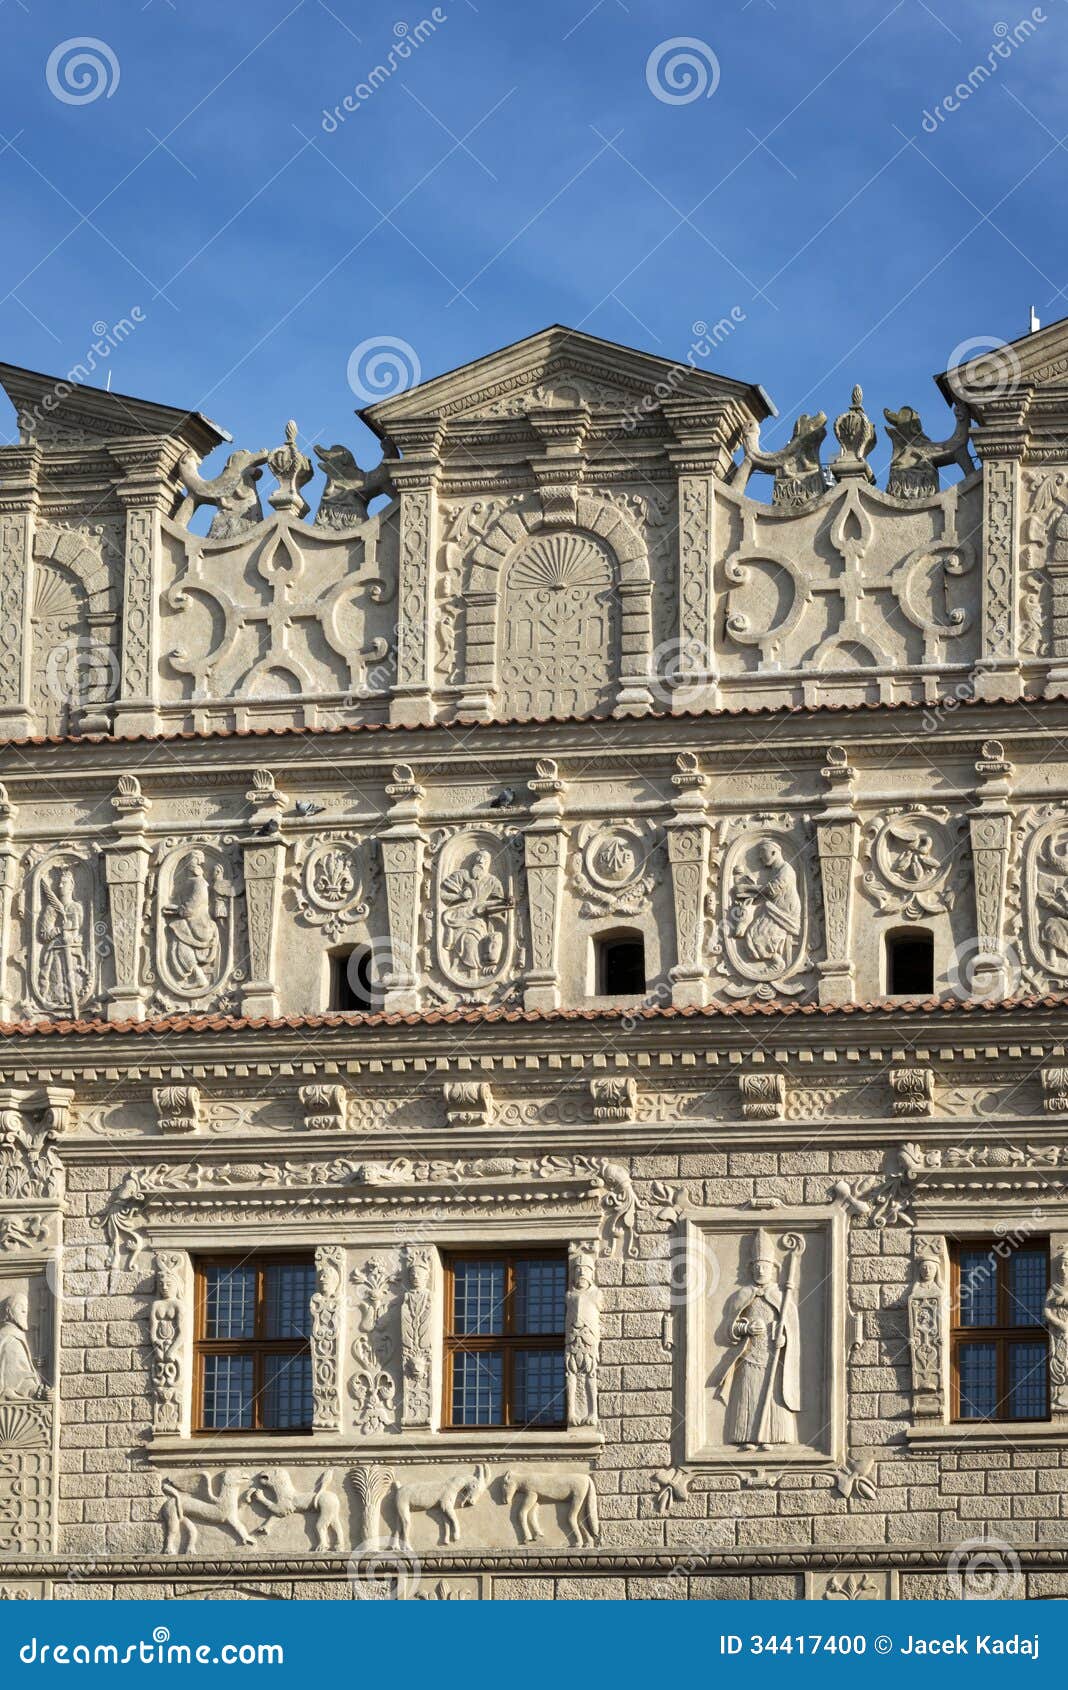 decorative facade at the market square in kazimierz dolny